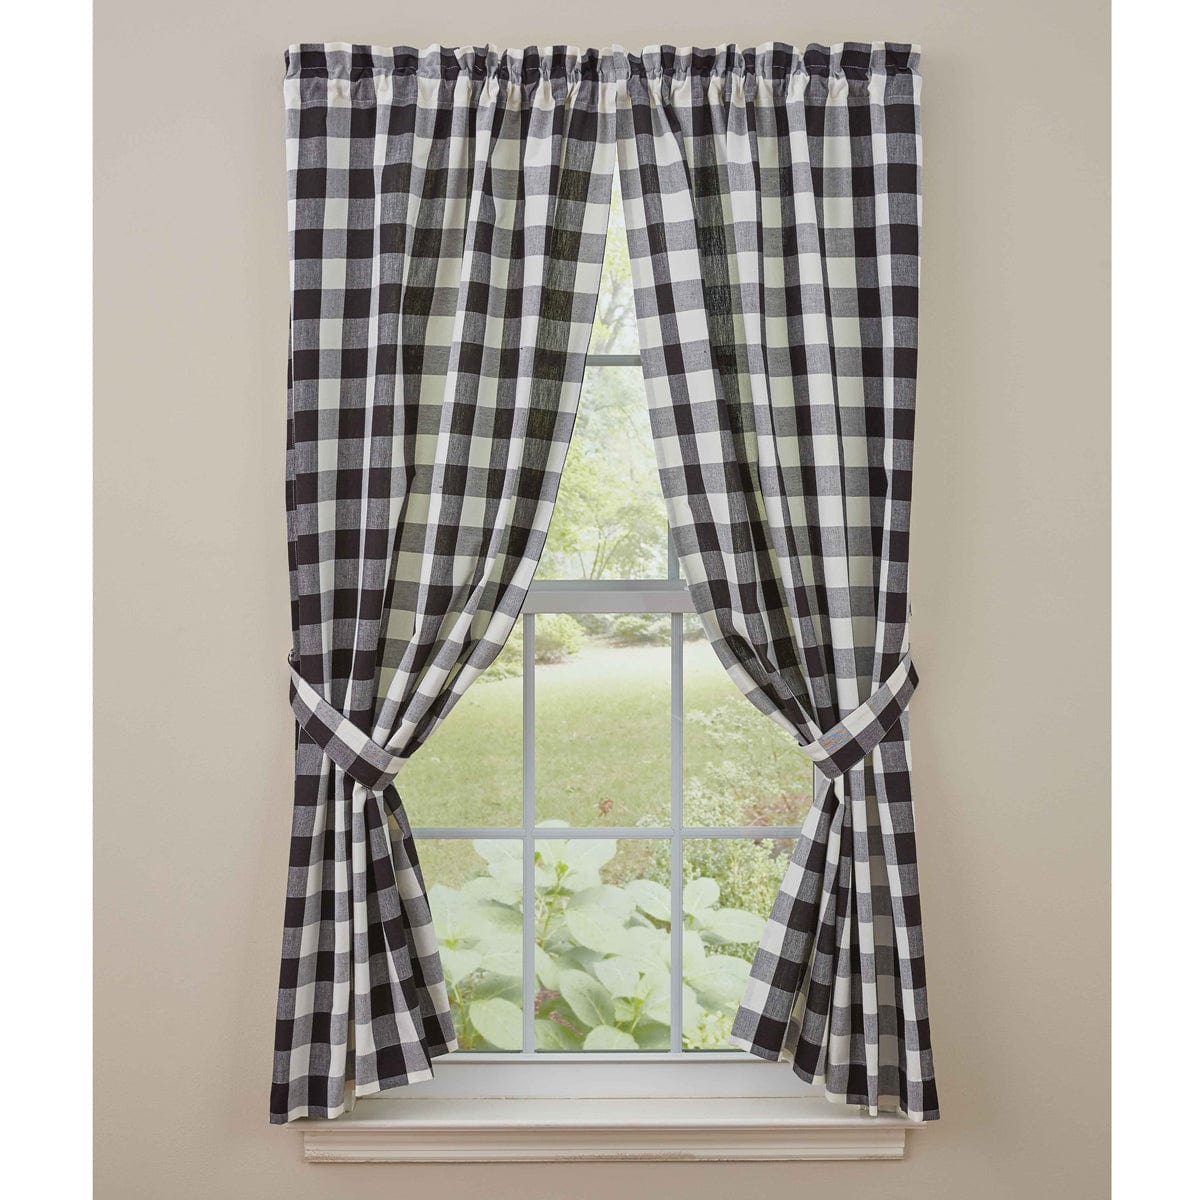 Wicklow Check in Black &amp; Cream Panel Pair With Tie Backs 63&quot; Long Unlined-Park Designs-The Village Merchant